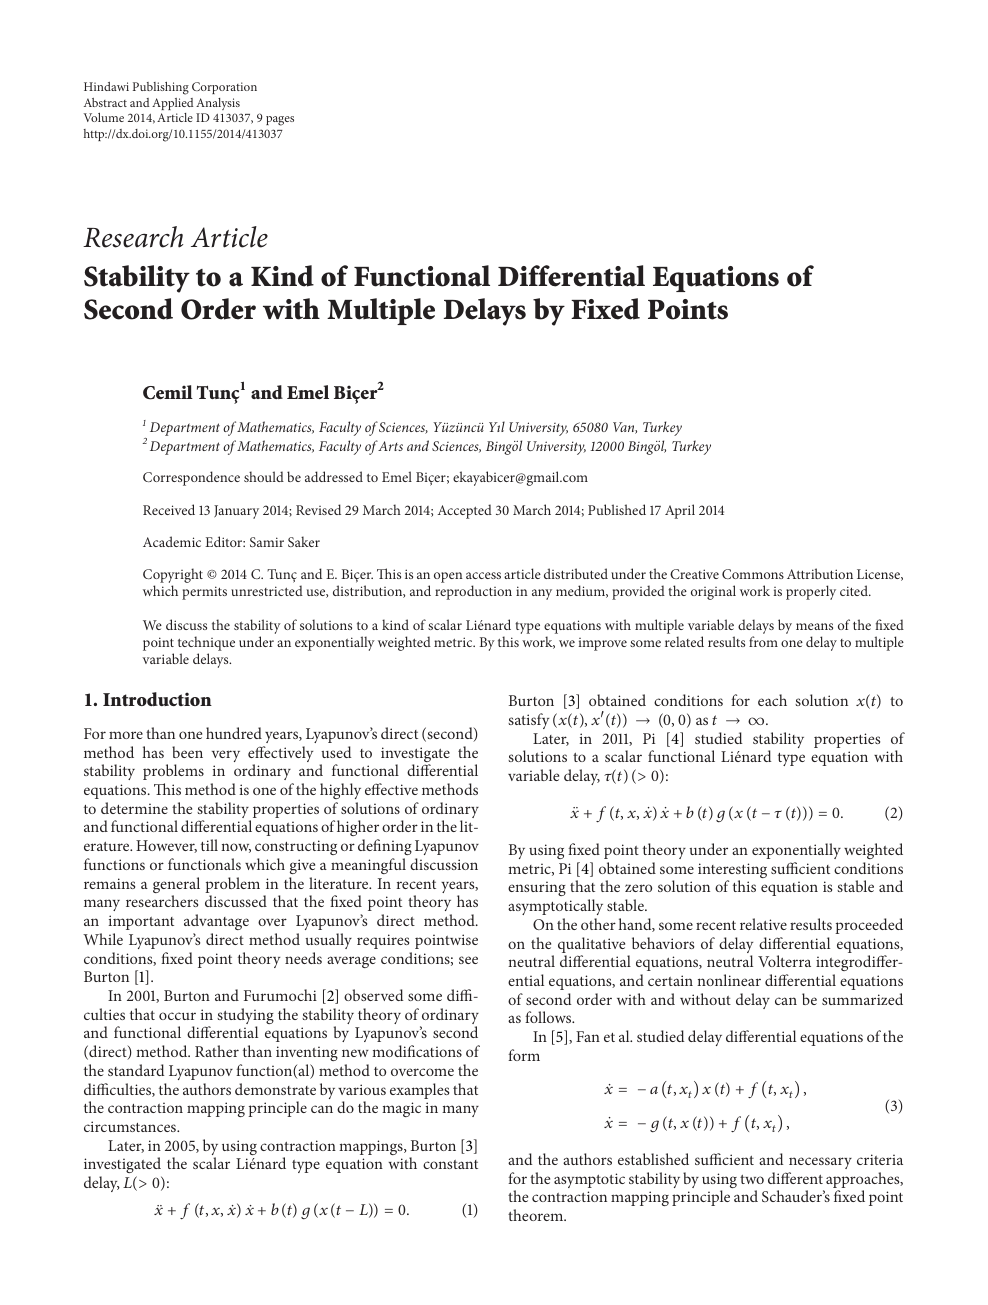 Stability To A Kind Of Functional Differential Equations Of Second Order With Multiple Delays By Fixed Points Topic Of Research Paper In Mathematics Download Scholarly Article Pdf And Read For Free